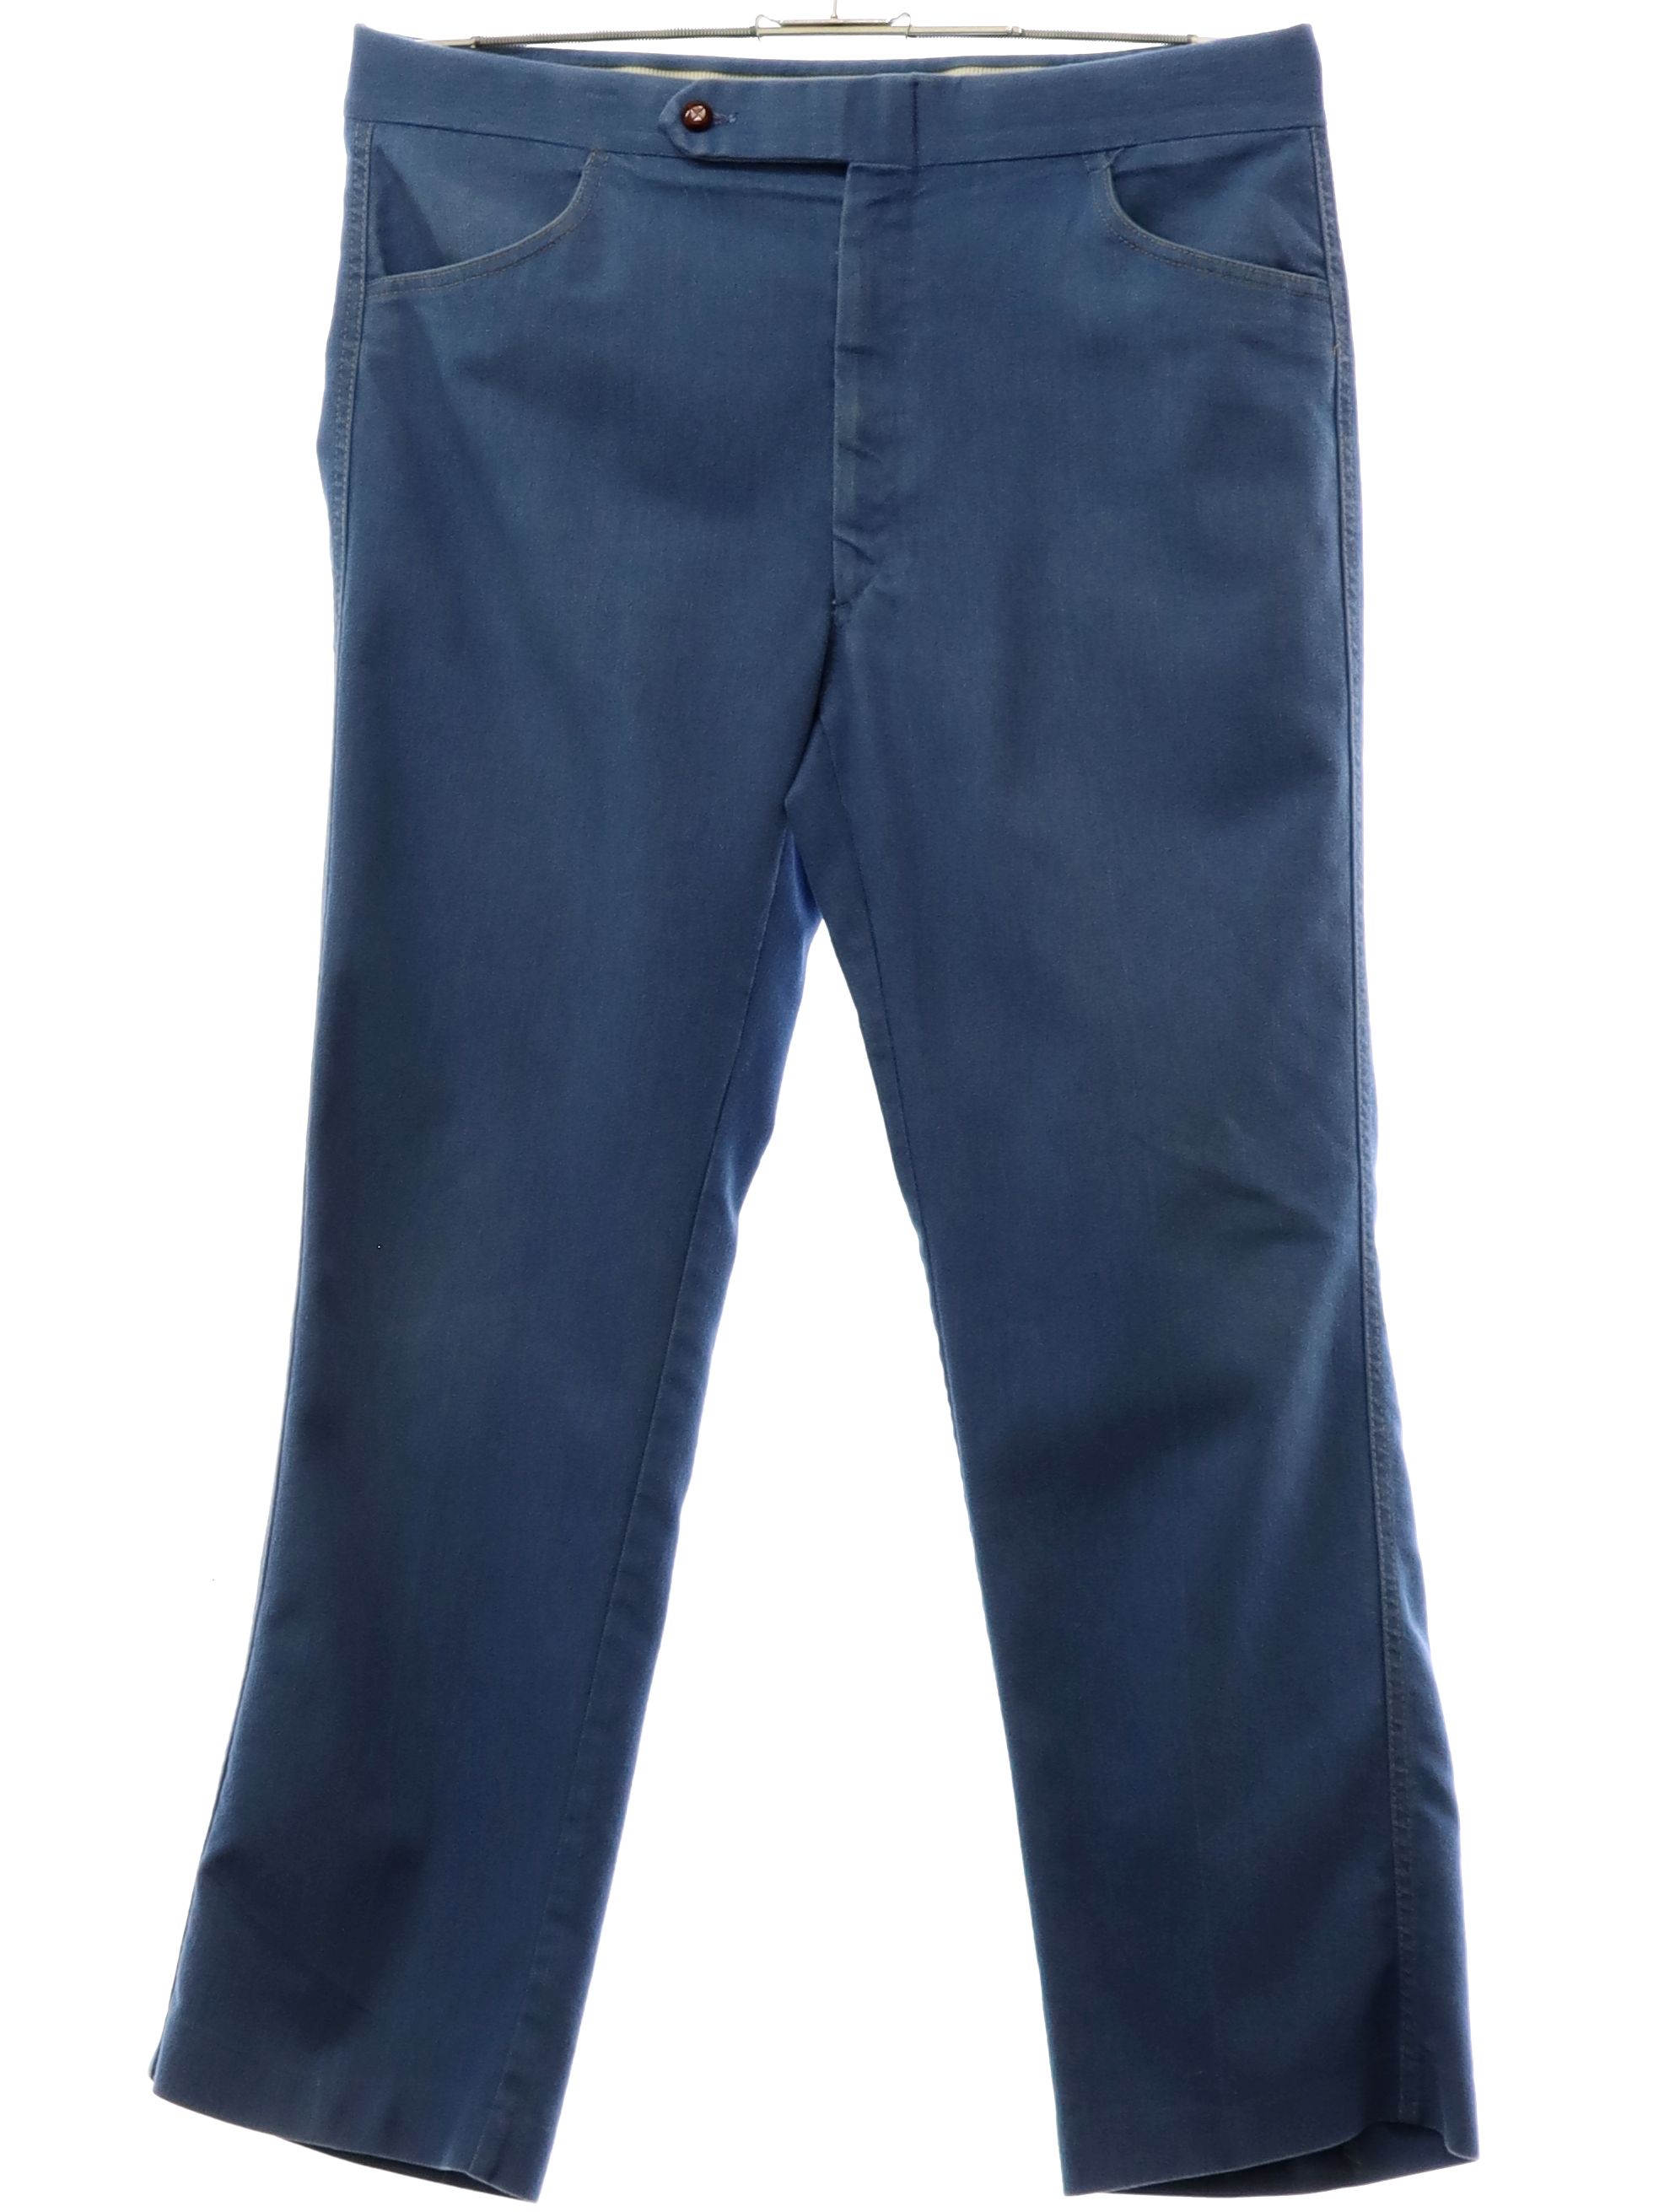 Retro 1970's Pants (Haggar Expand O Matic) : 70s -Haggar Expand O Matic-  Mens lighter blue solid colored brushed cotton denim flat front brushed  cotton denim pants with cuffless hem, front scoop